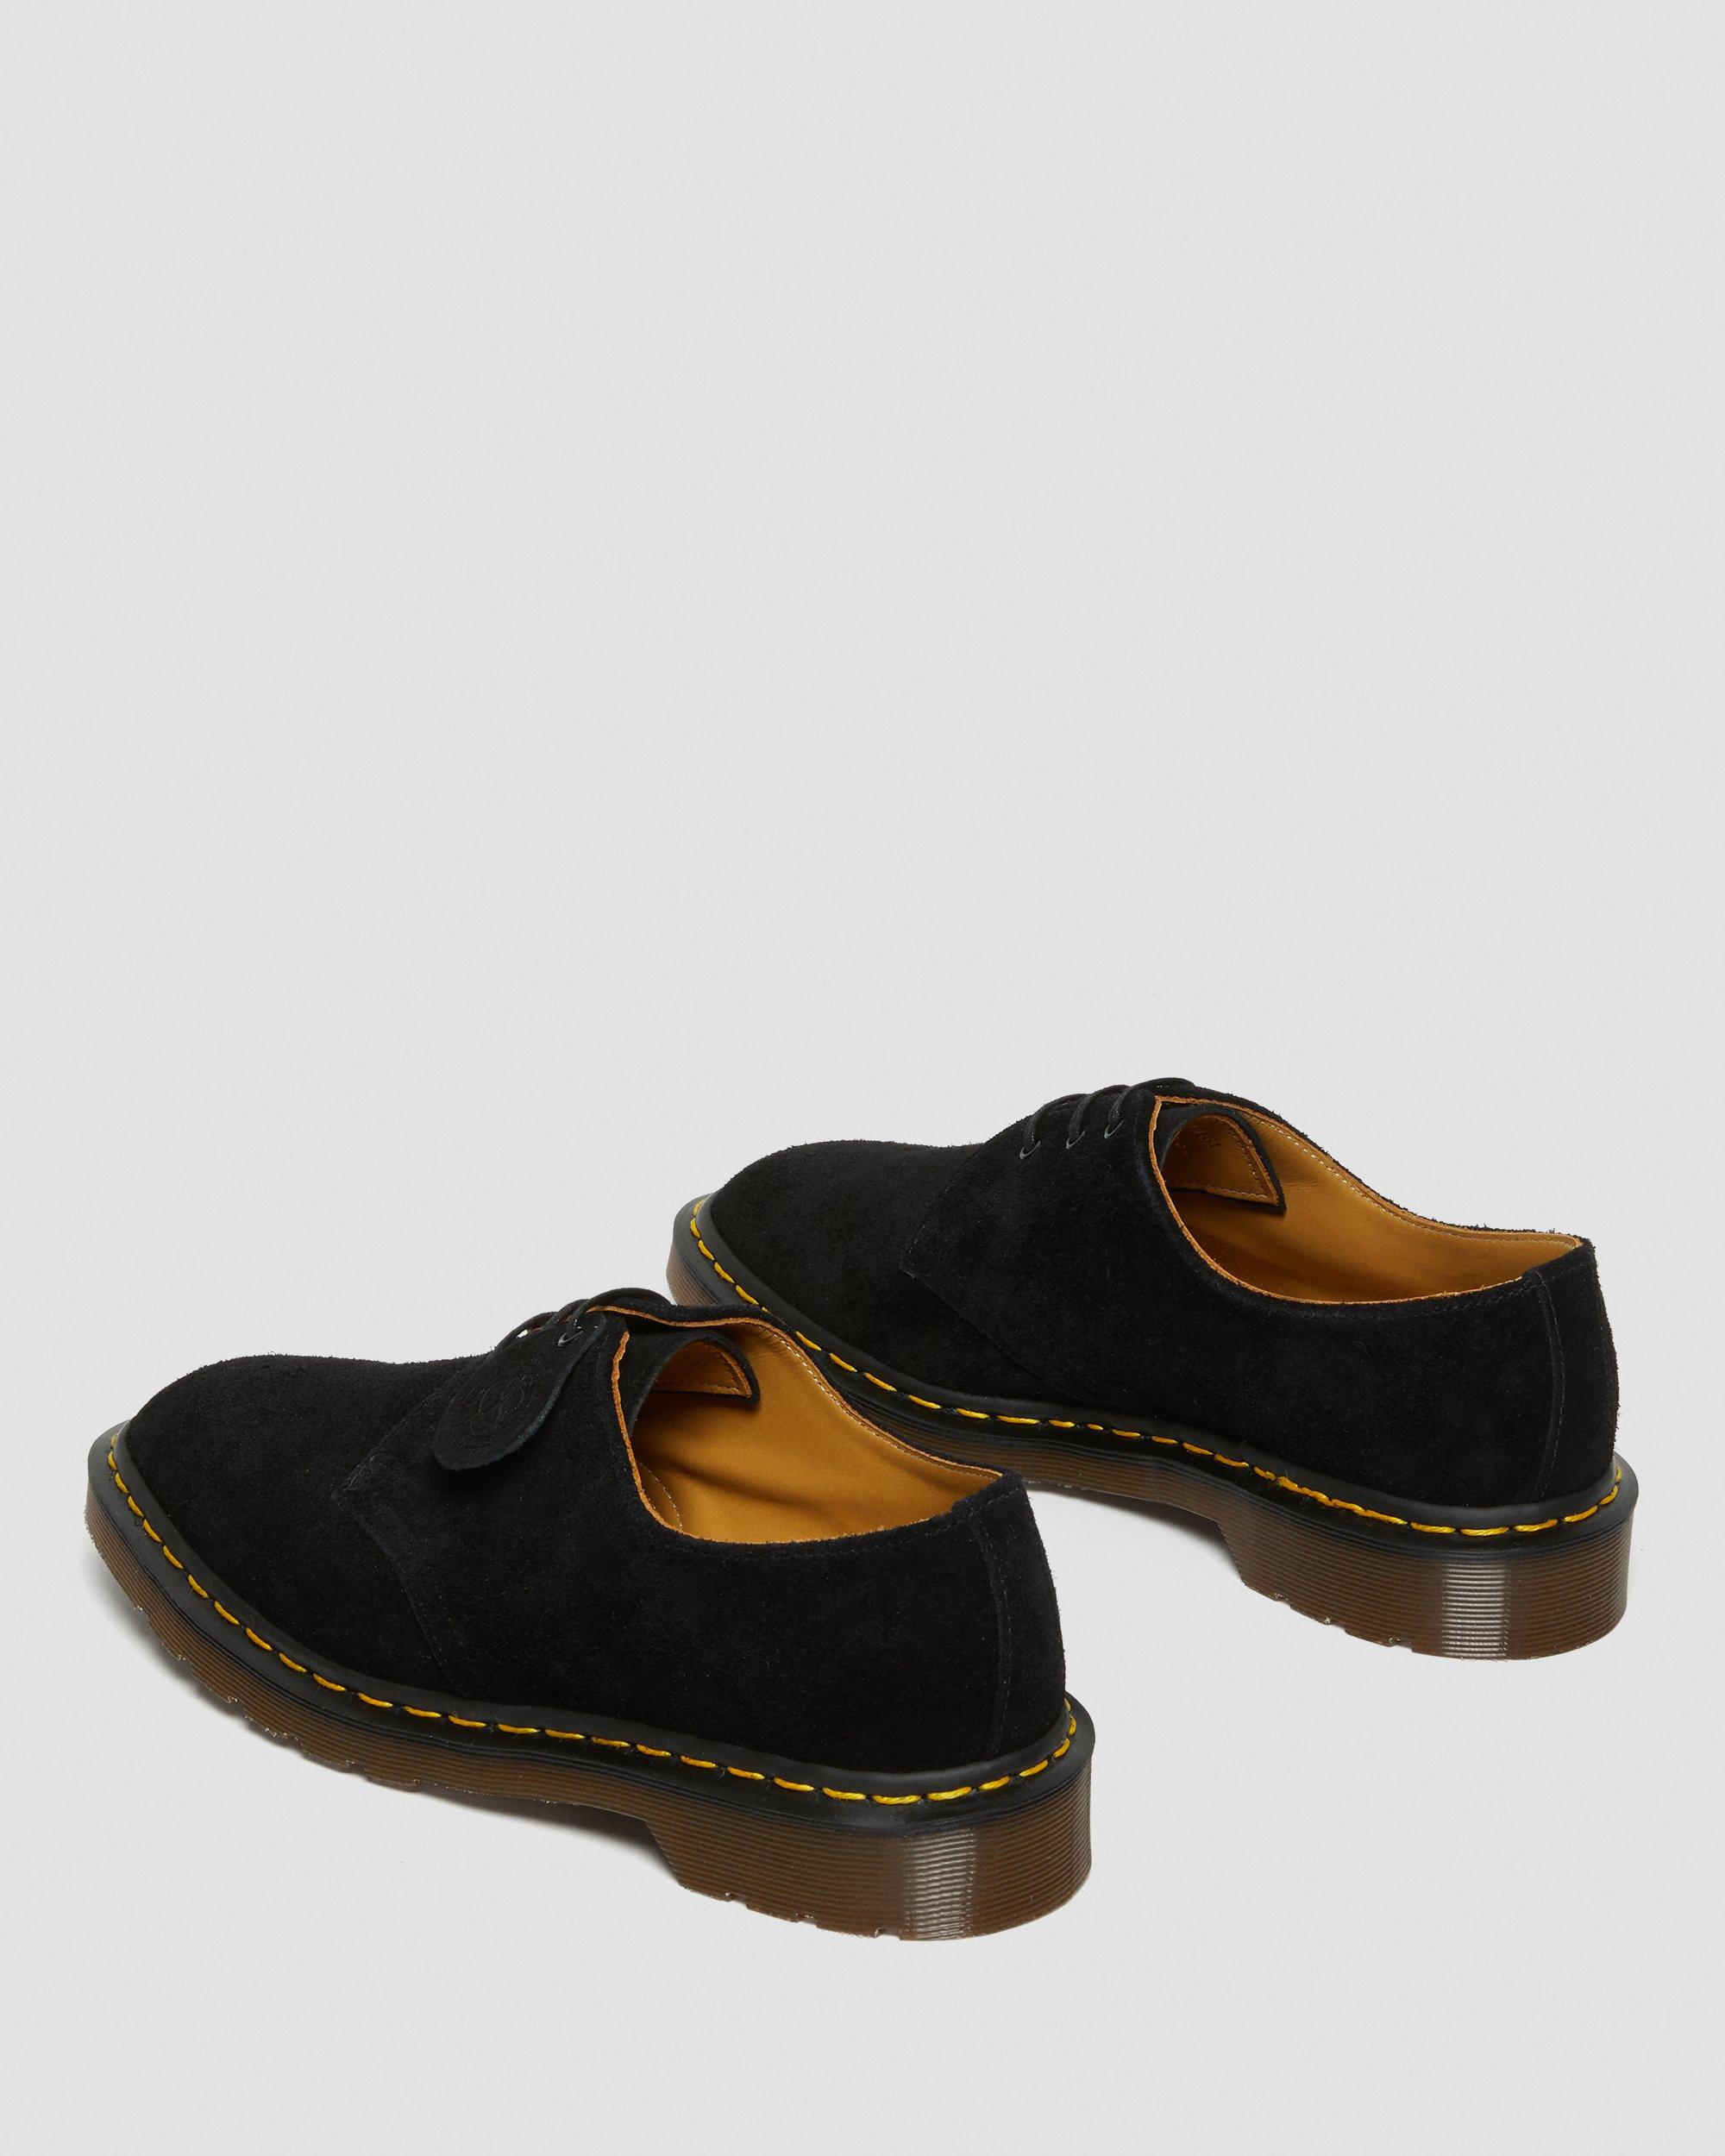 1461 Made In England Suede Oxford Shoes, Black | Dr. Martens